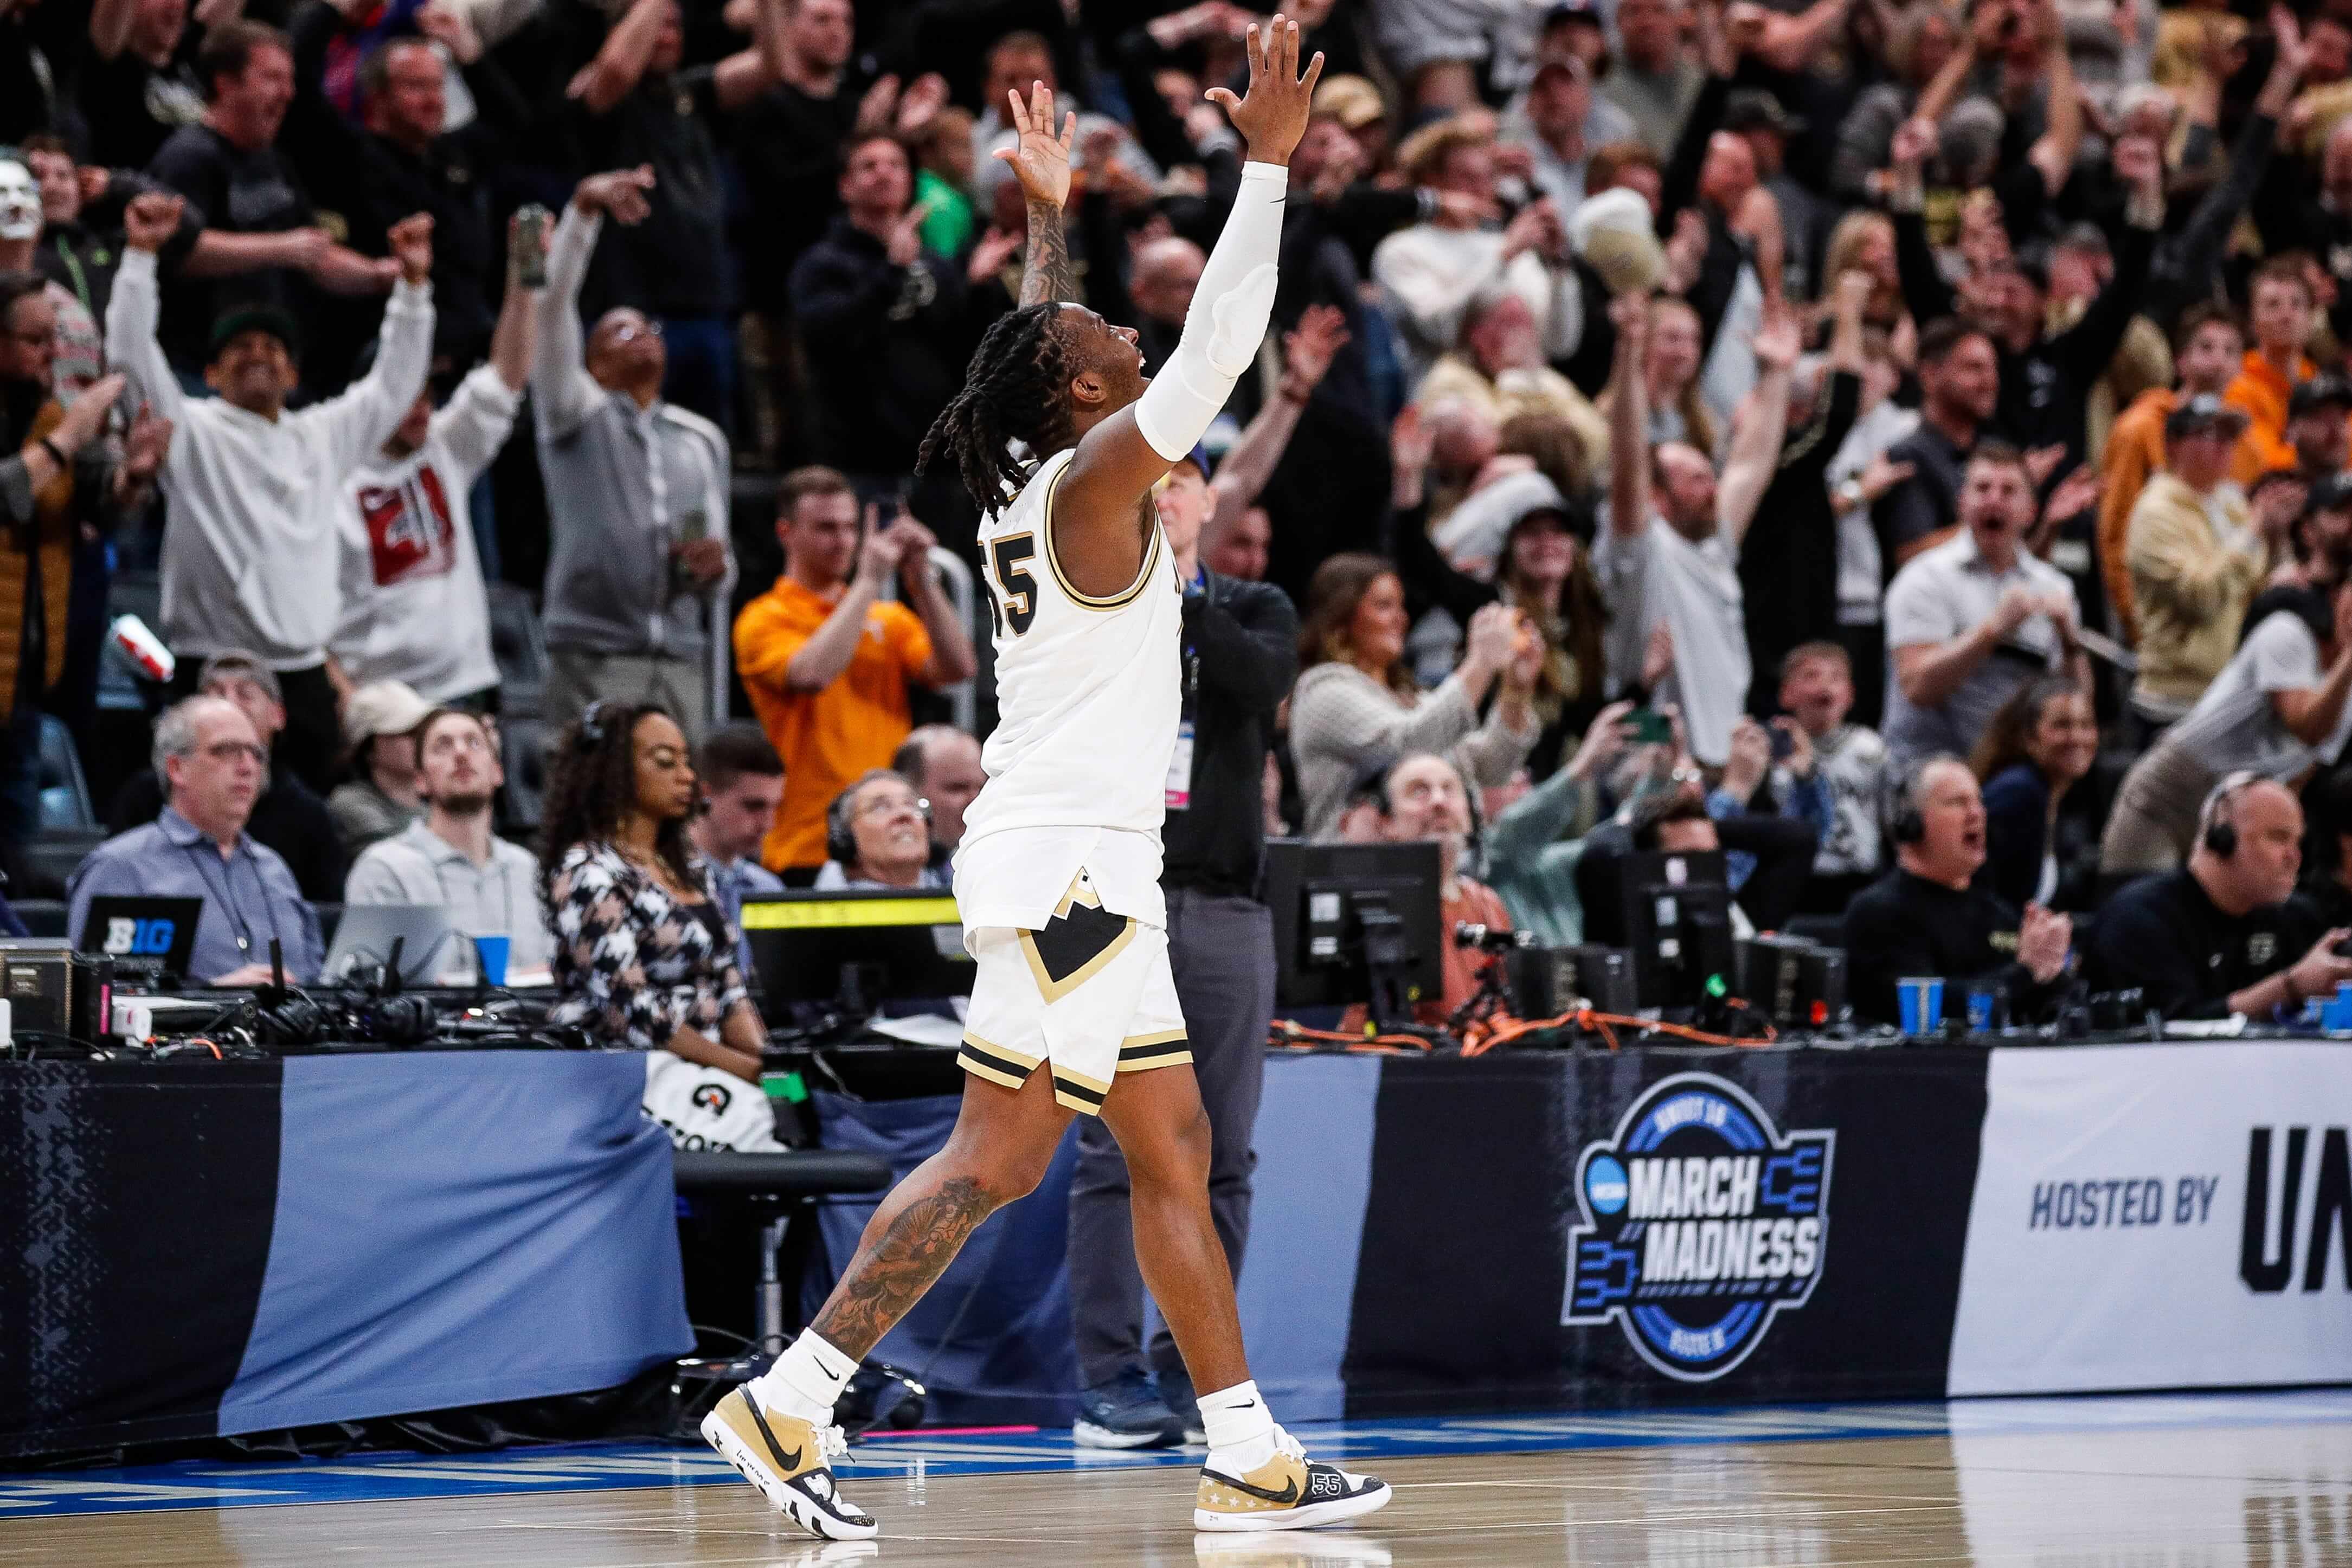 Purdue guard Lance Jones celebrates 72-66 win over Tennessee at the NCAA tournament Elite 8